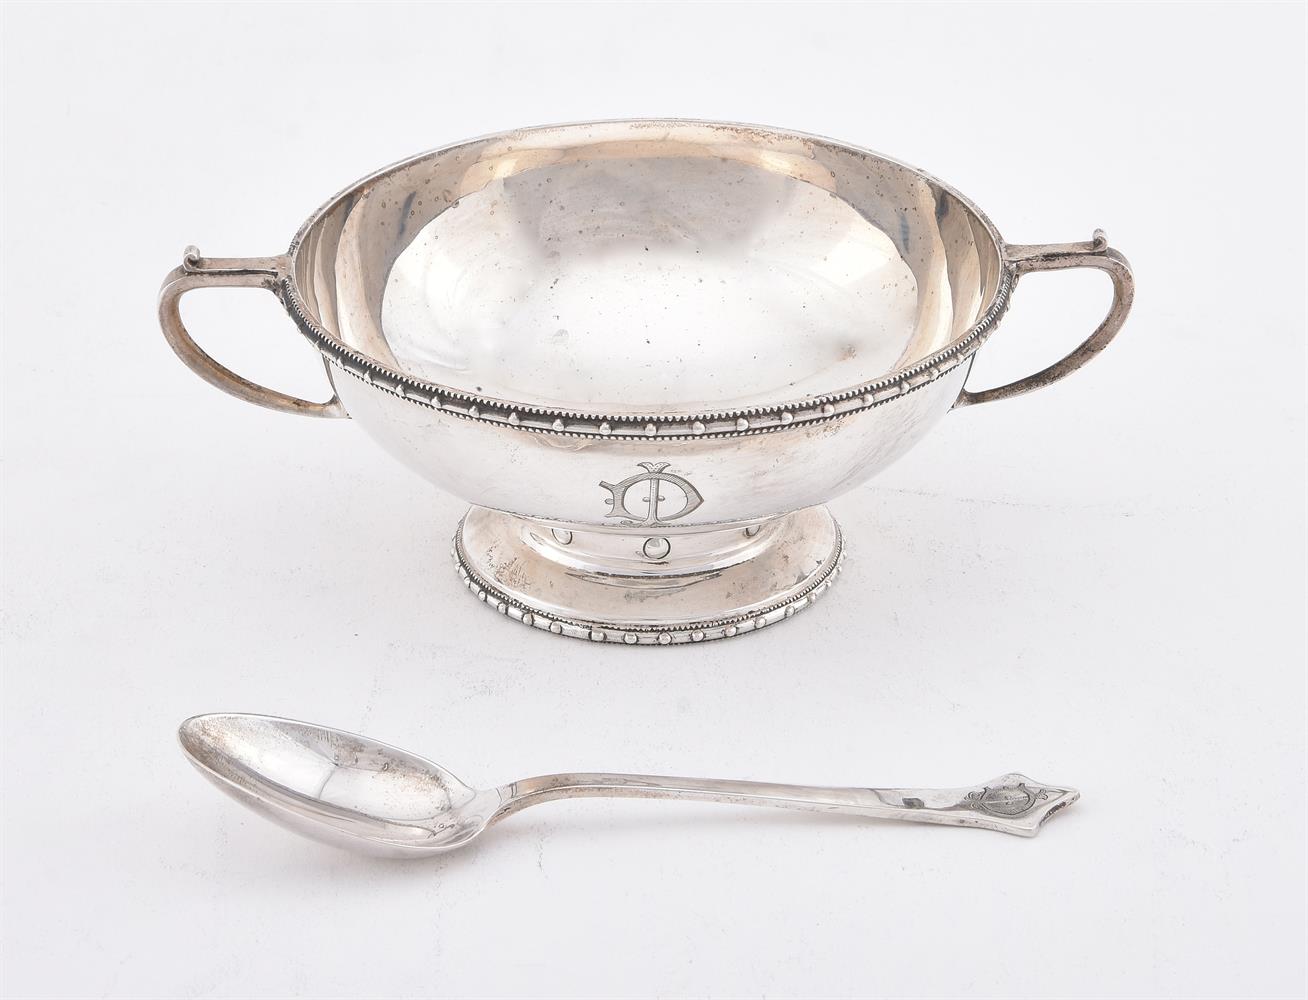 A SILVER TWIN HANDLED CHRISTENING BOWL AND SPOON, BARKER BROTHERS SILVER LTD - Image 3 of 3